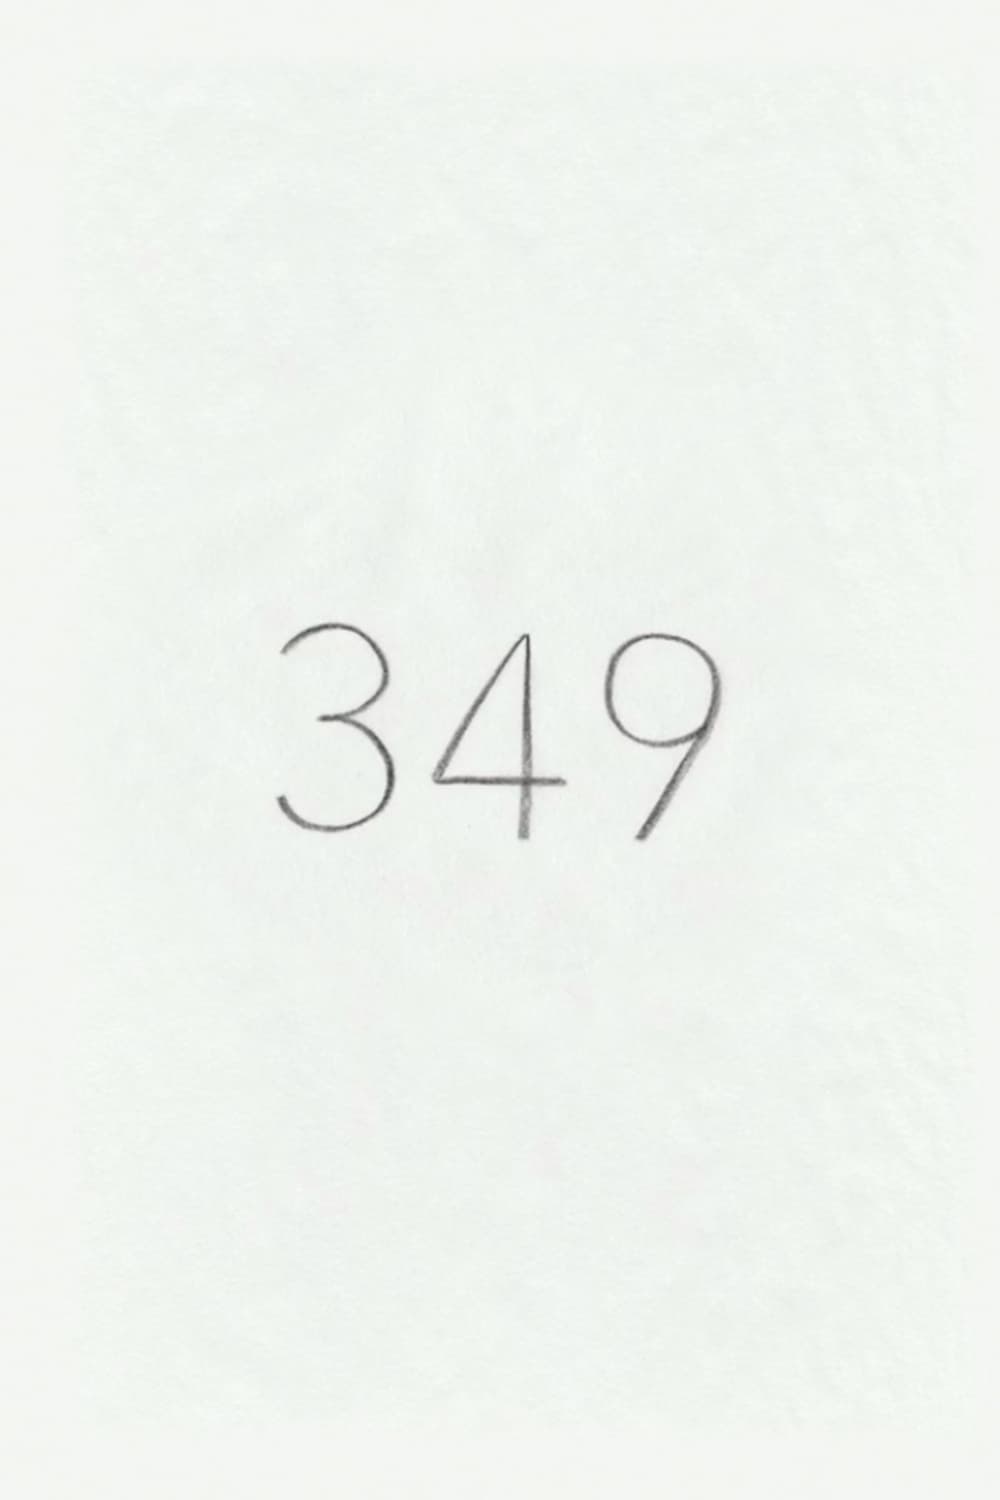 349 Poster